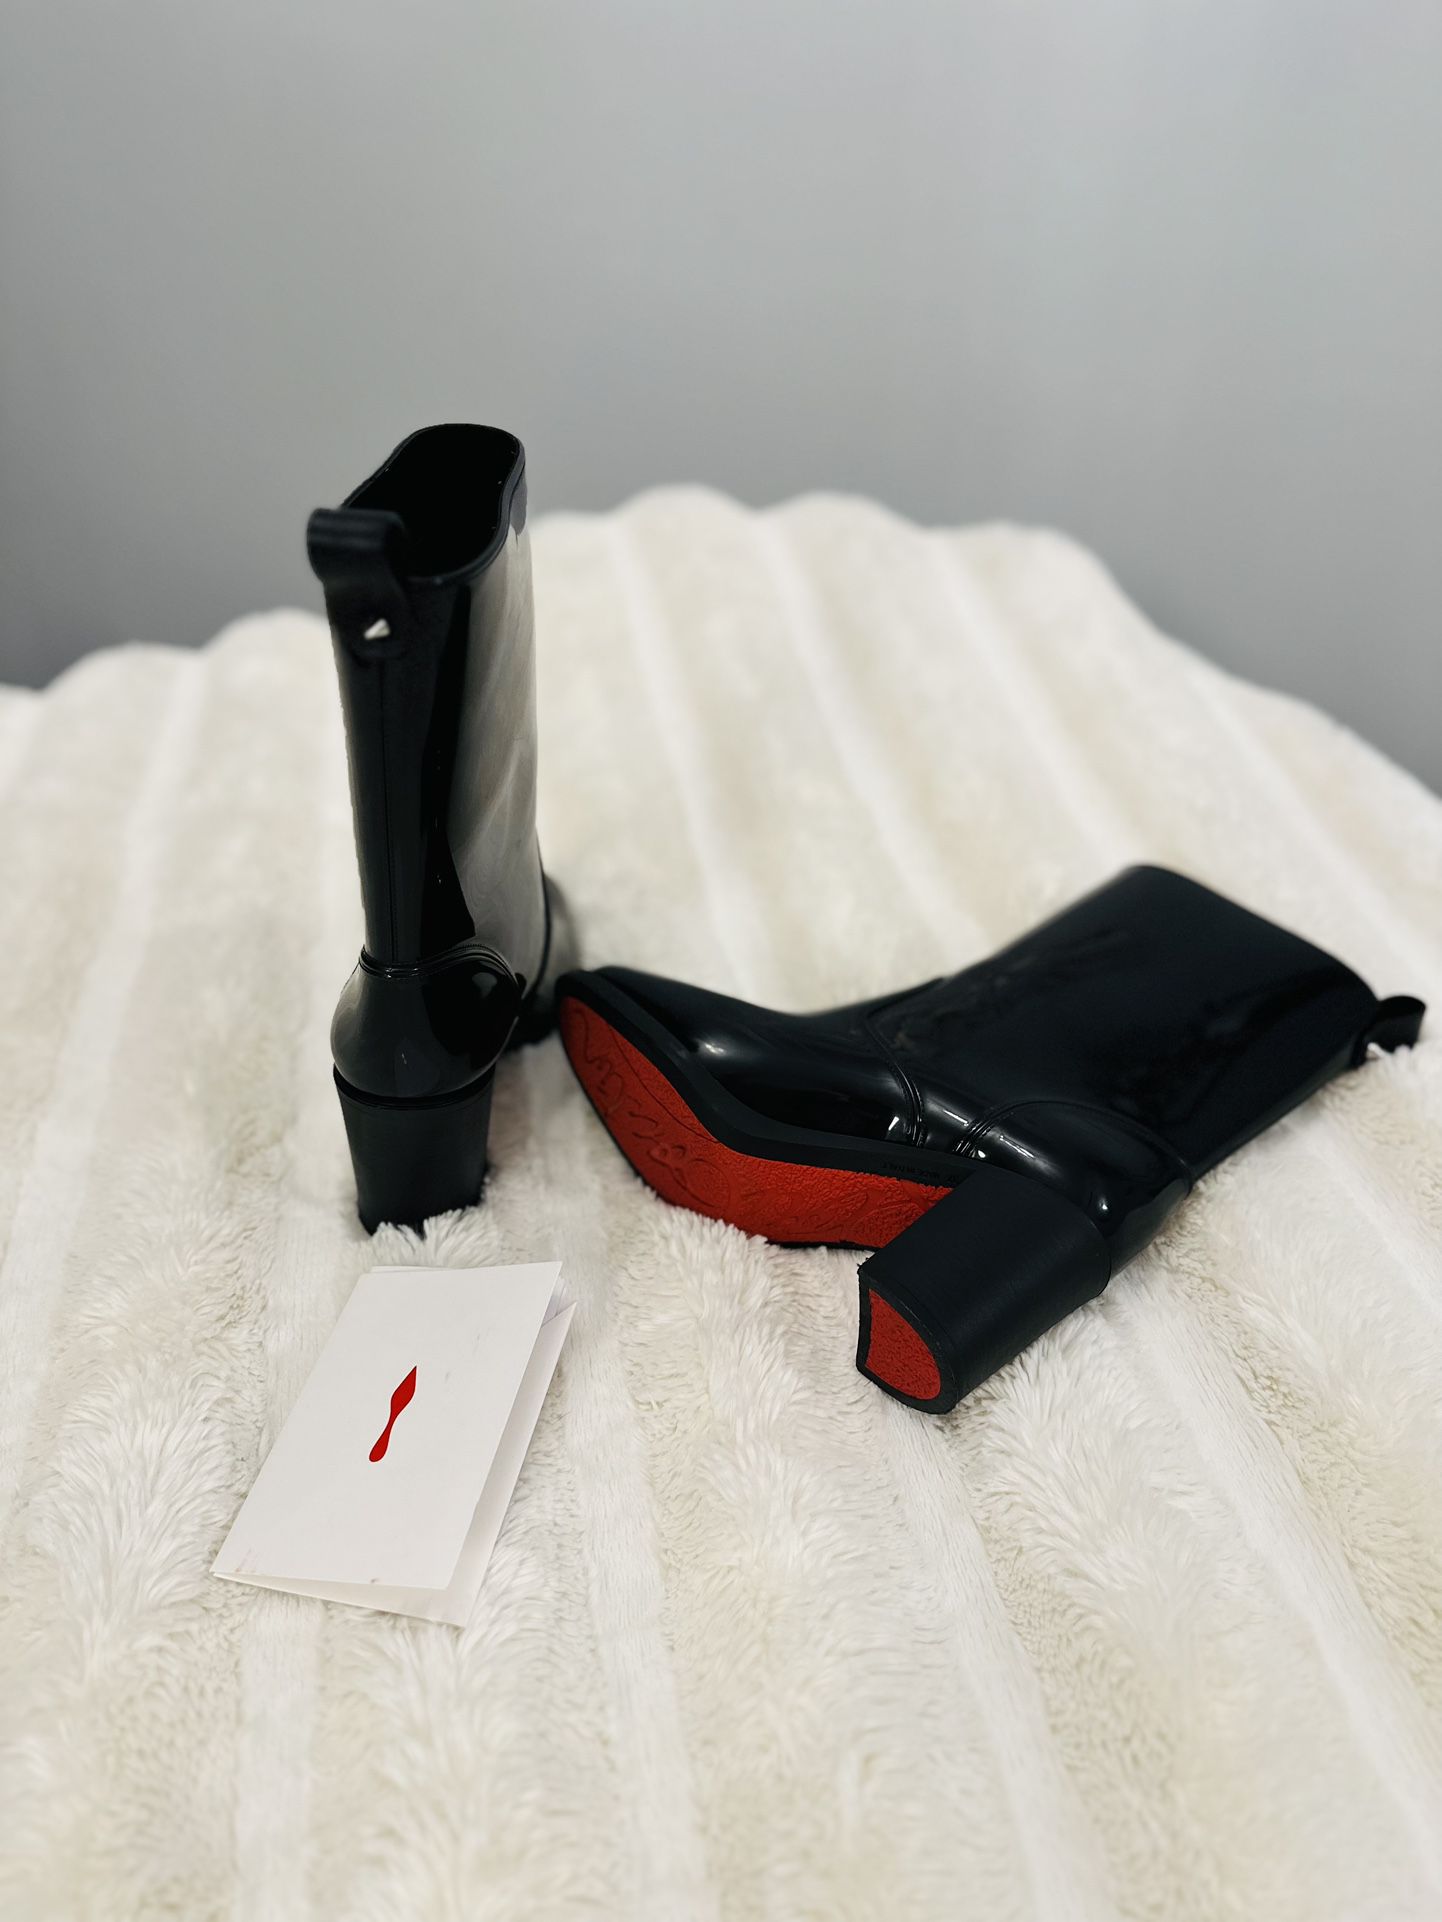 Christian Louboutin Rain boots Sz 7 US Authentic for Sale in Federal Way,  WA - OfferUp